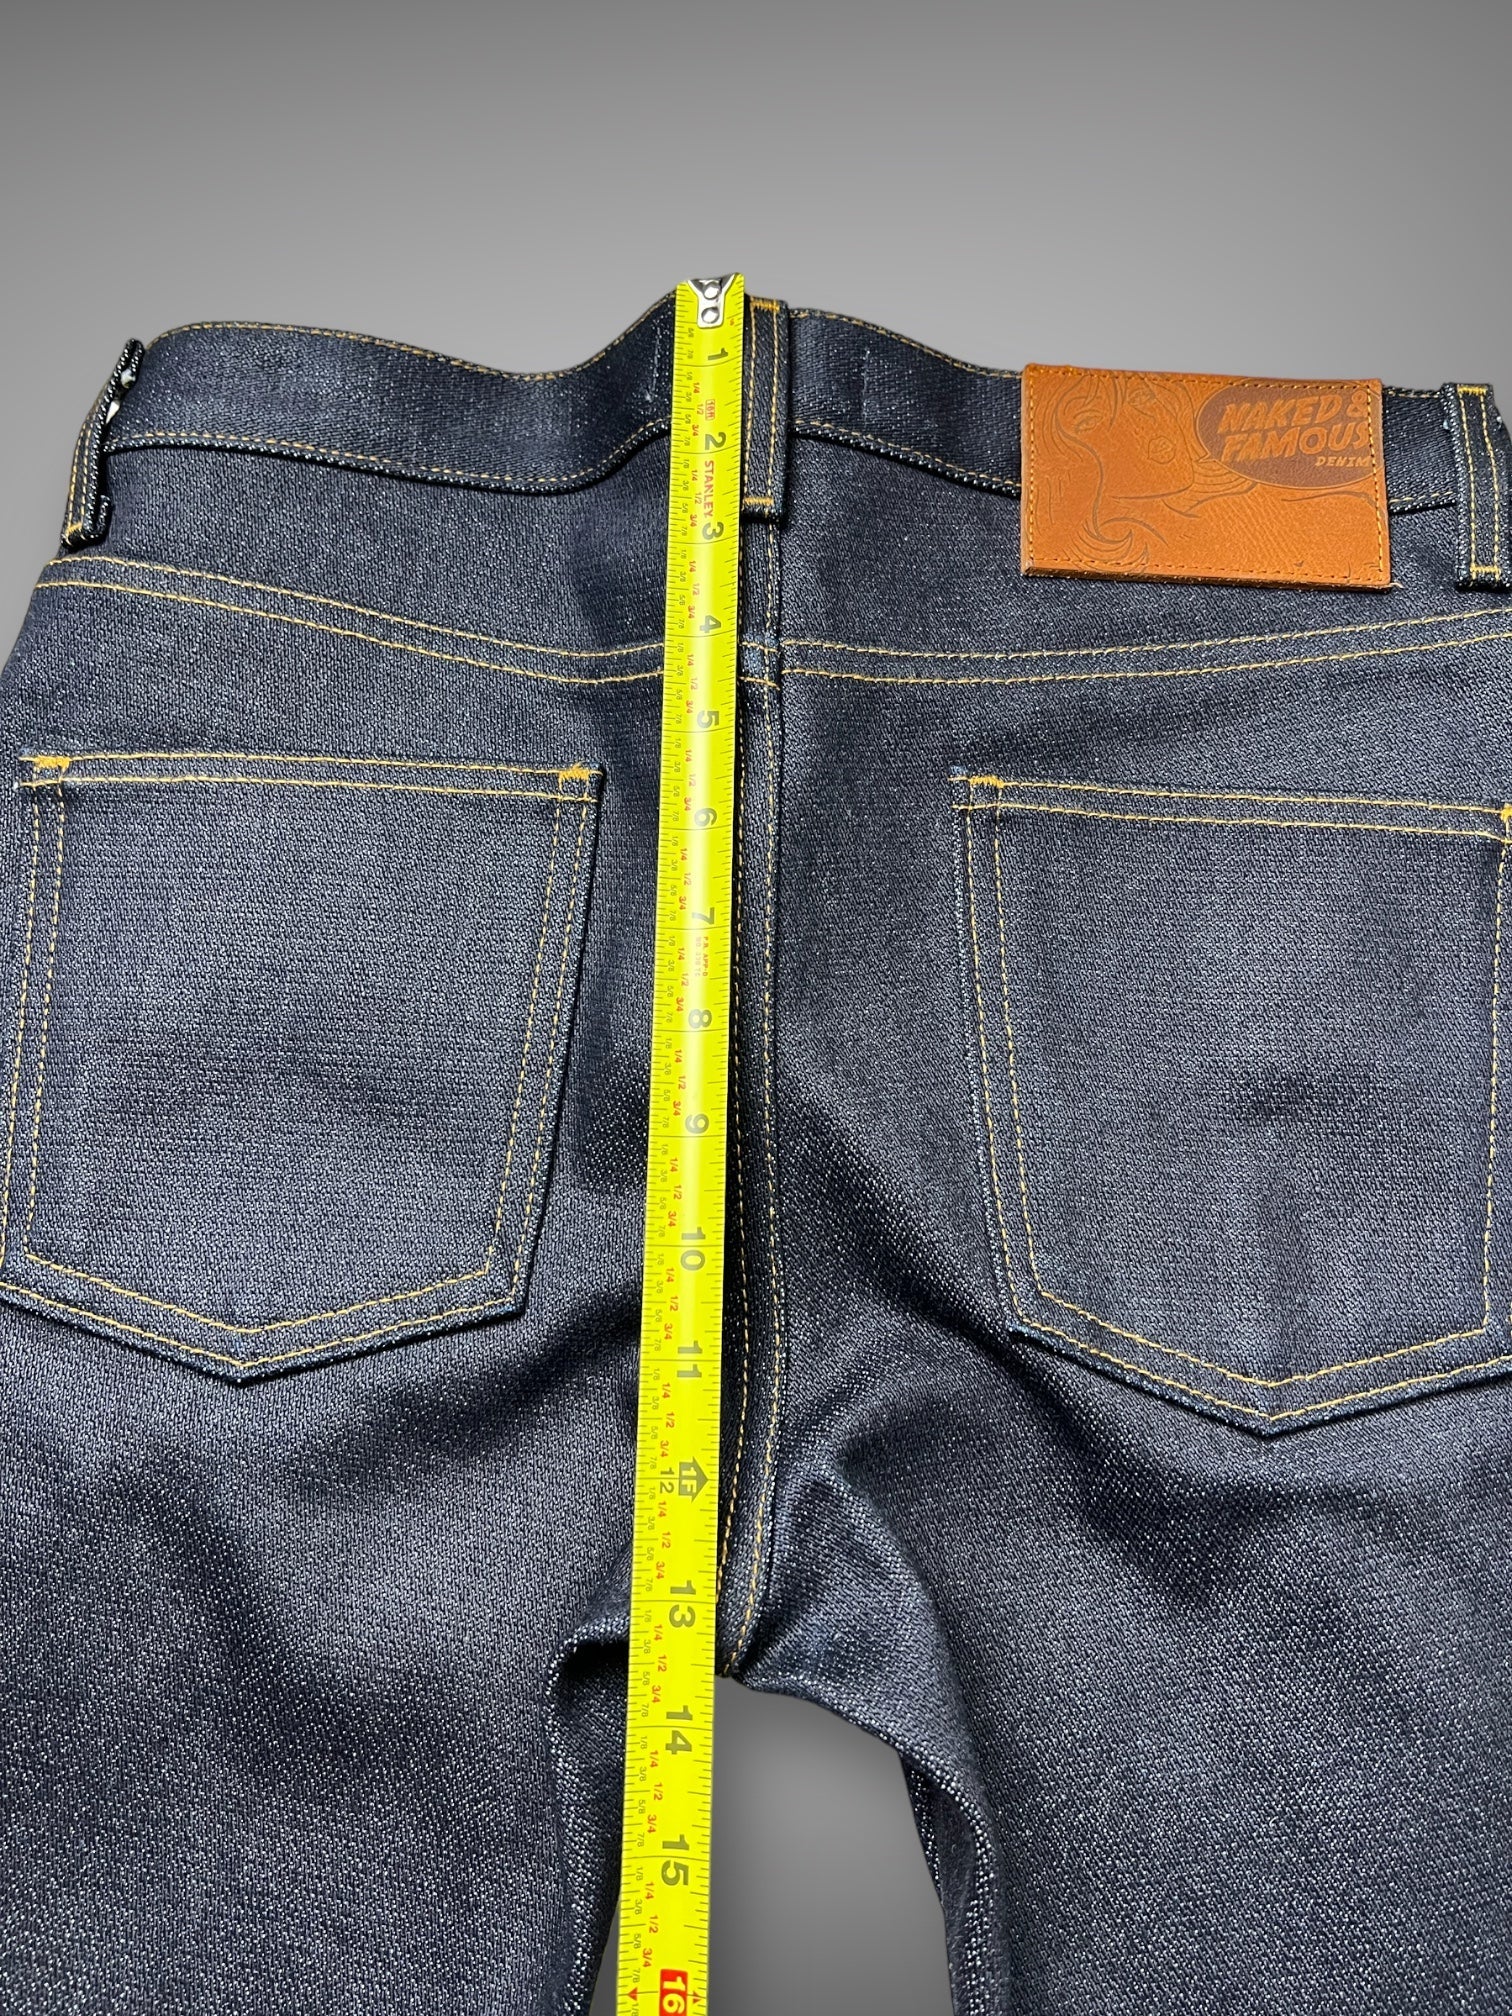 Japanese heavy ounce selvage denim jeans 35x30.5”